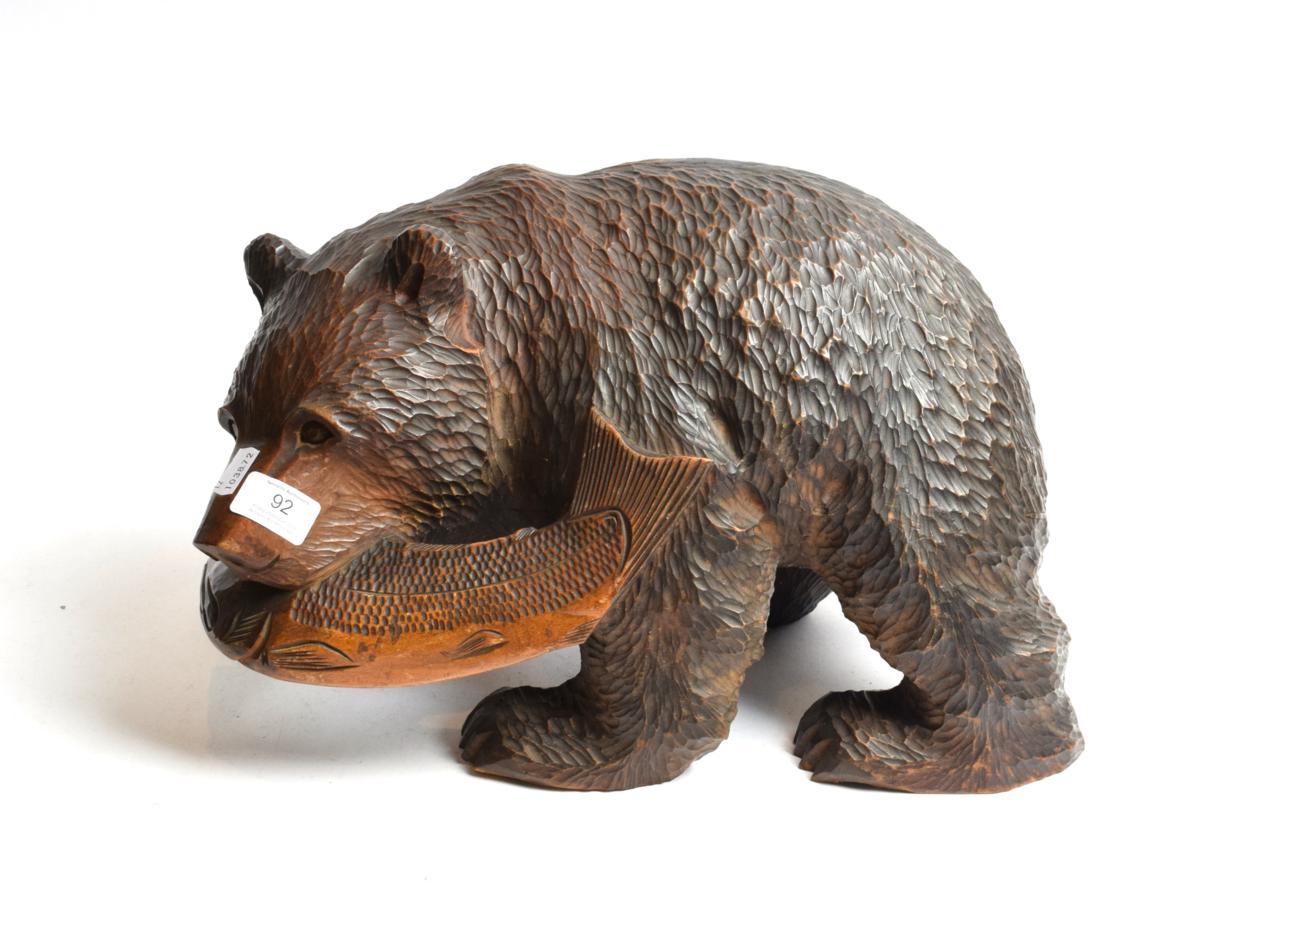 Lot 92 - A wooden carving of a bear catching salmon